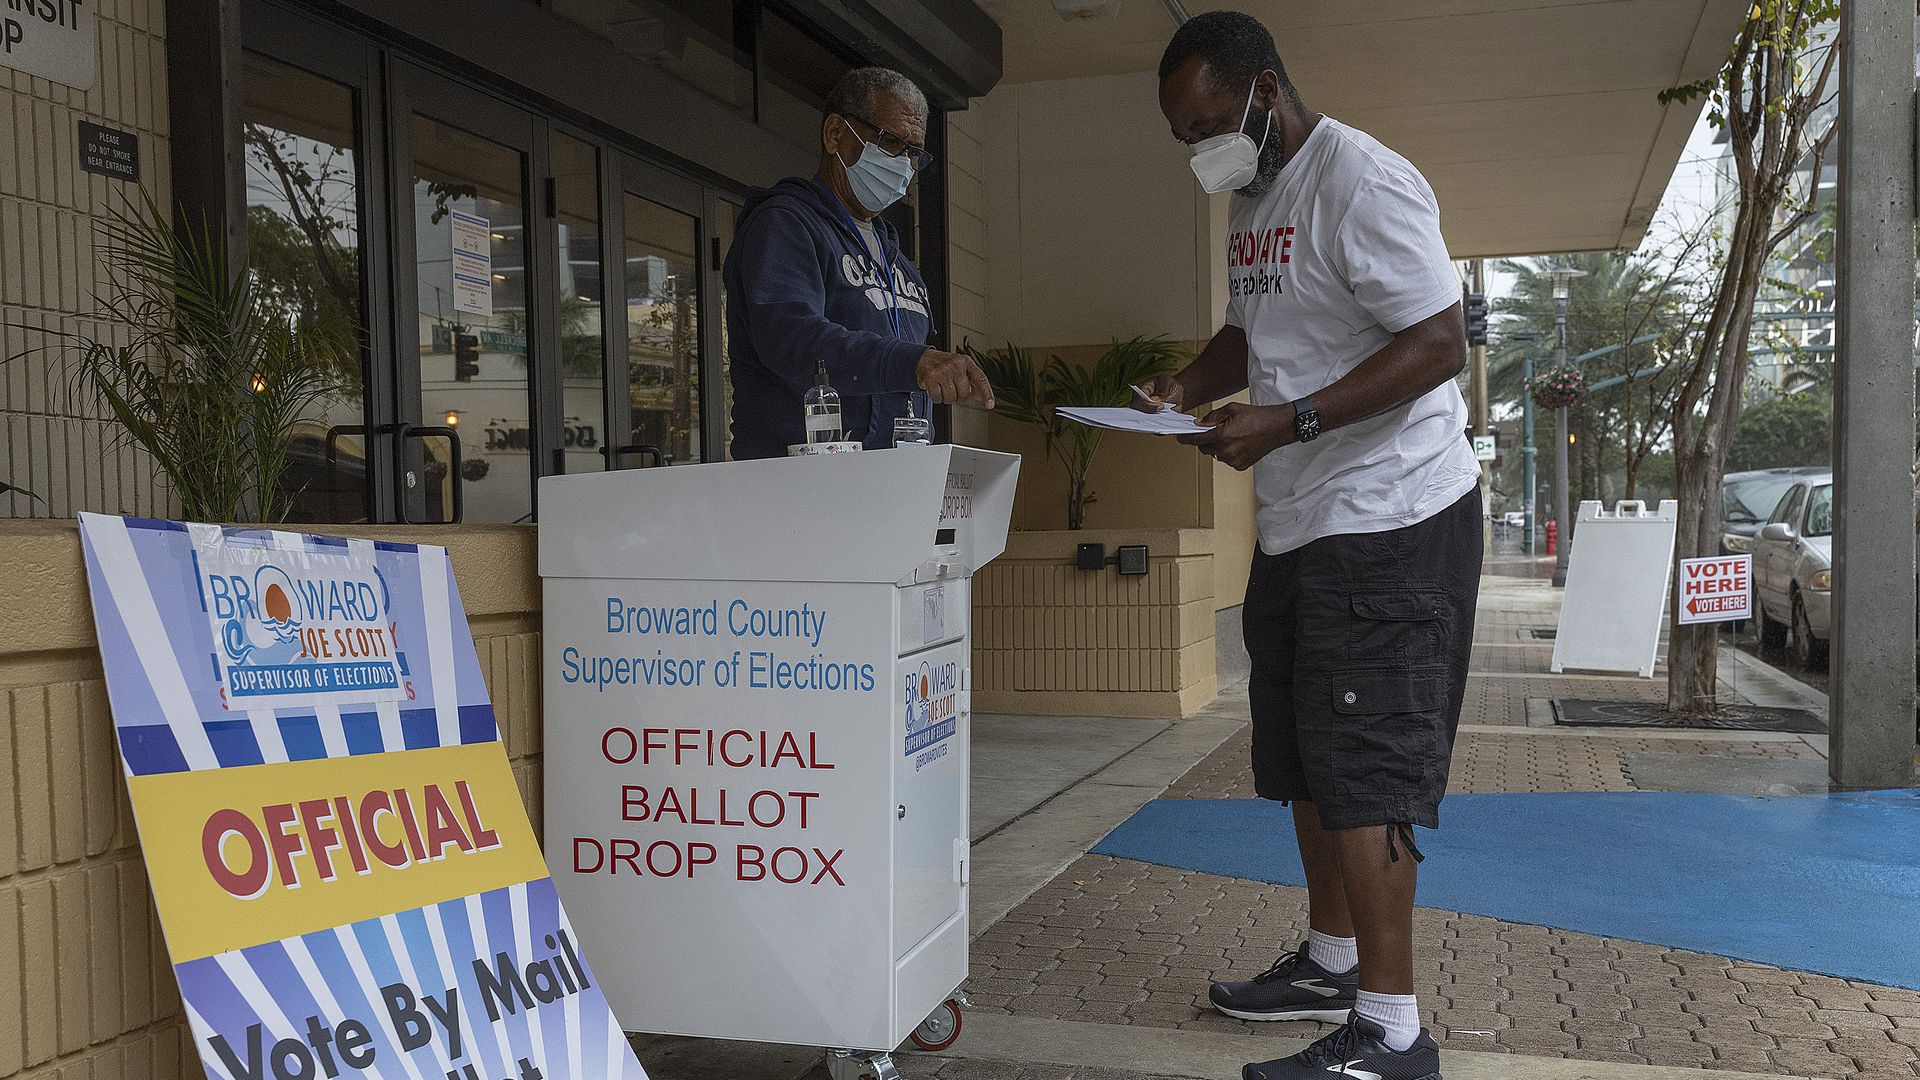 Wilbur Harbin prepares to place his ballot in a vote by mail ballot drop box during the Congressional district 20 elections on January 11, 2022 in Ft. Lauderdale, Florida.